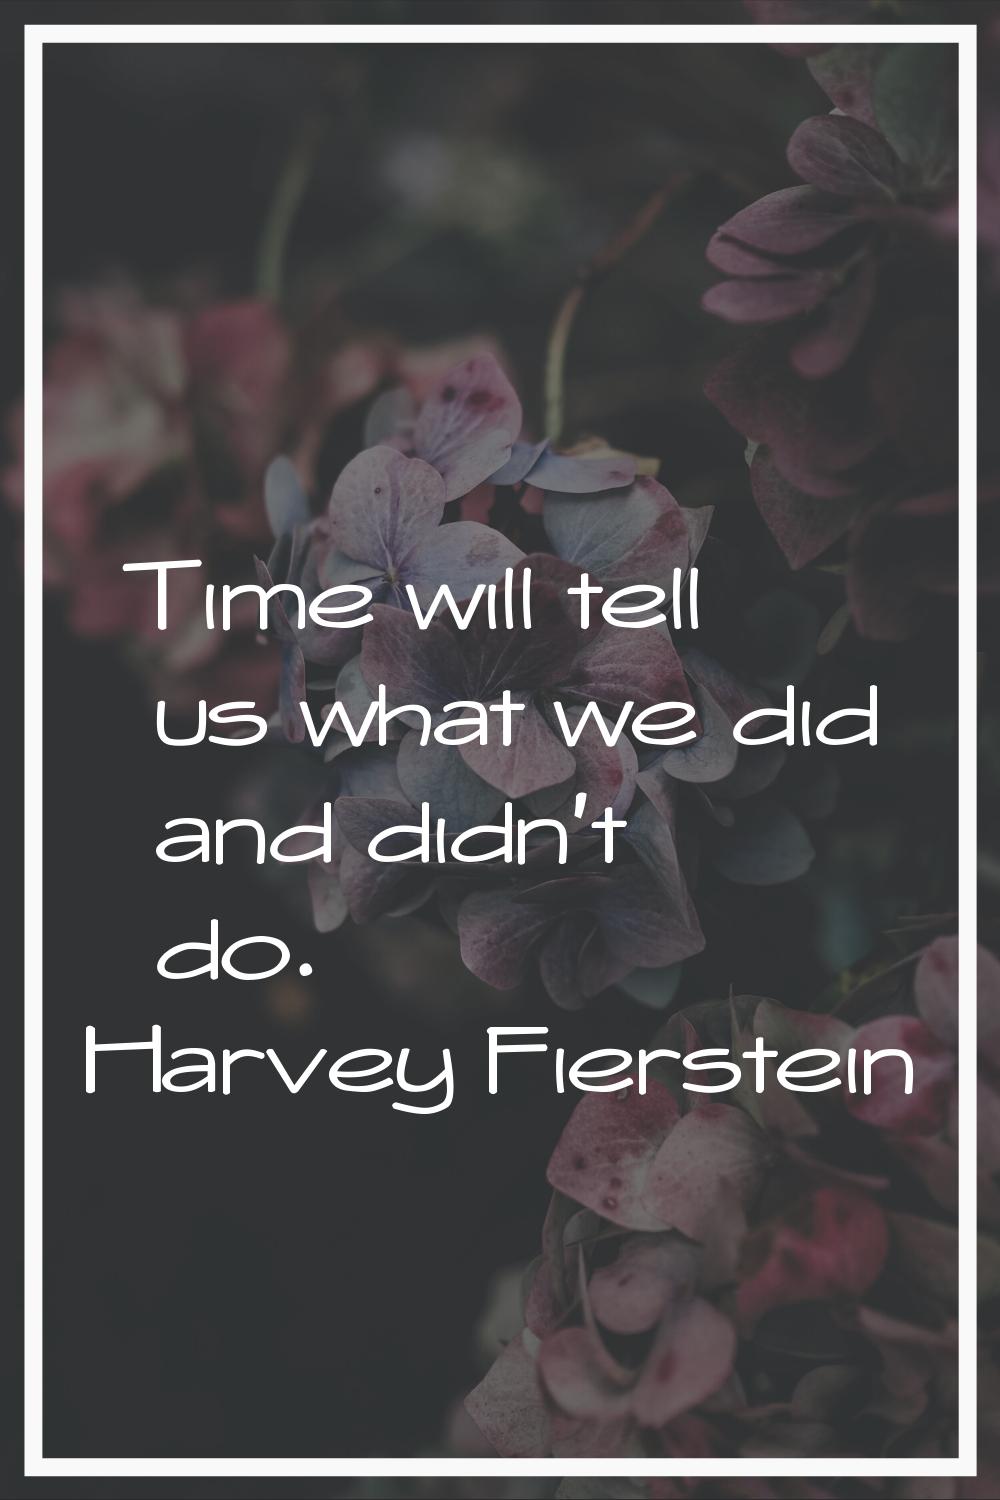 Time will tell us what we did and didn't do.